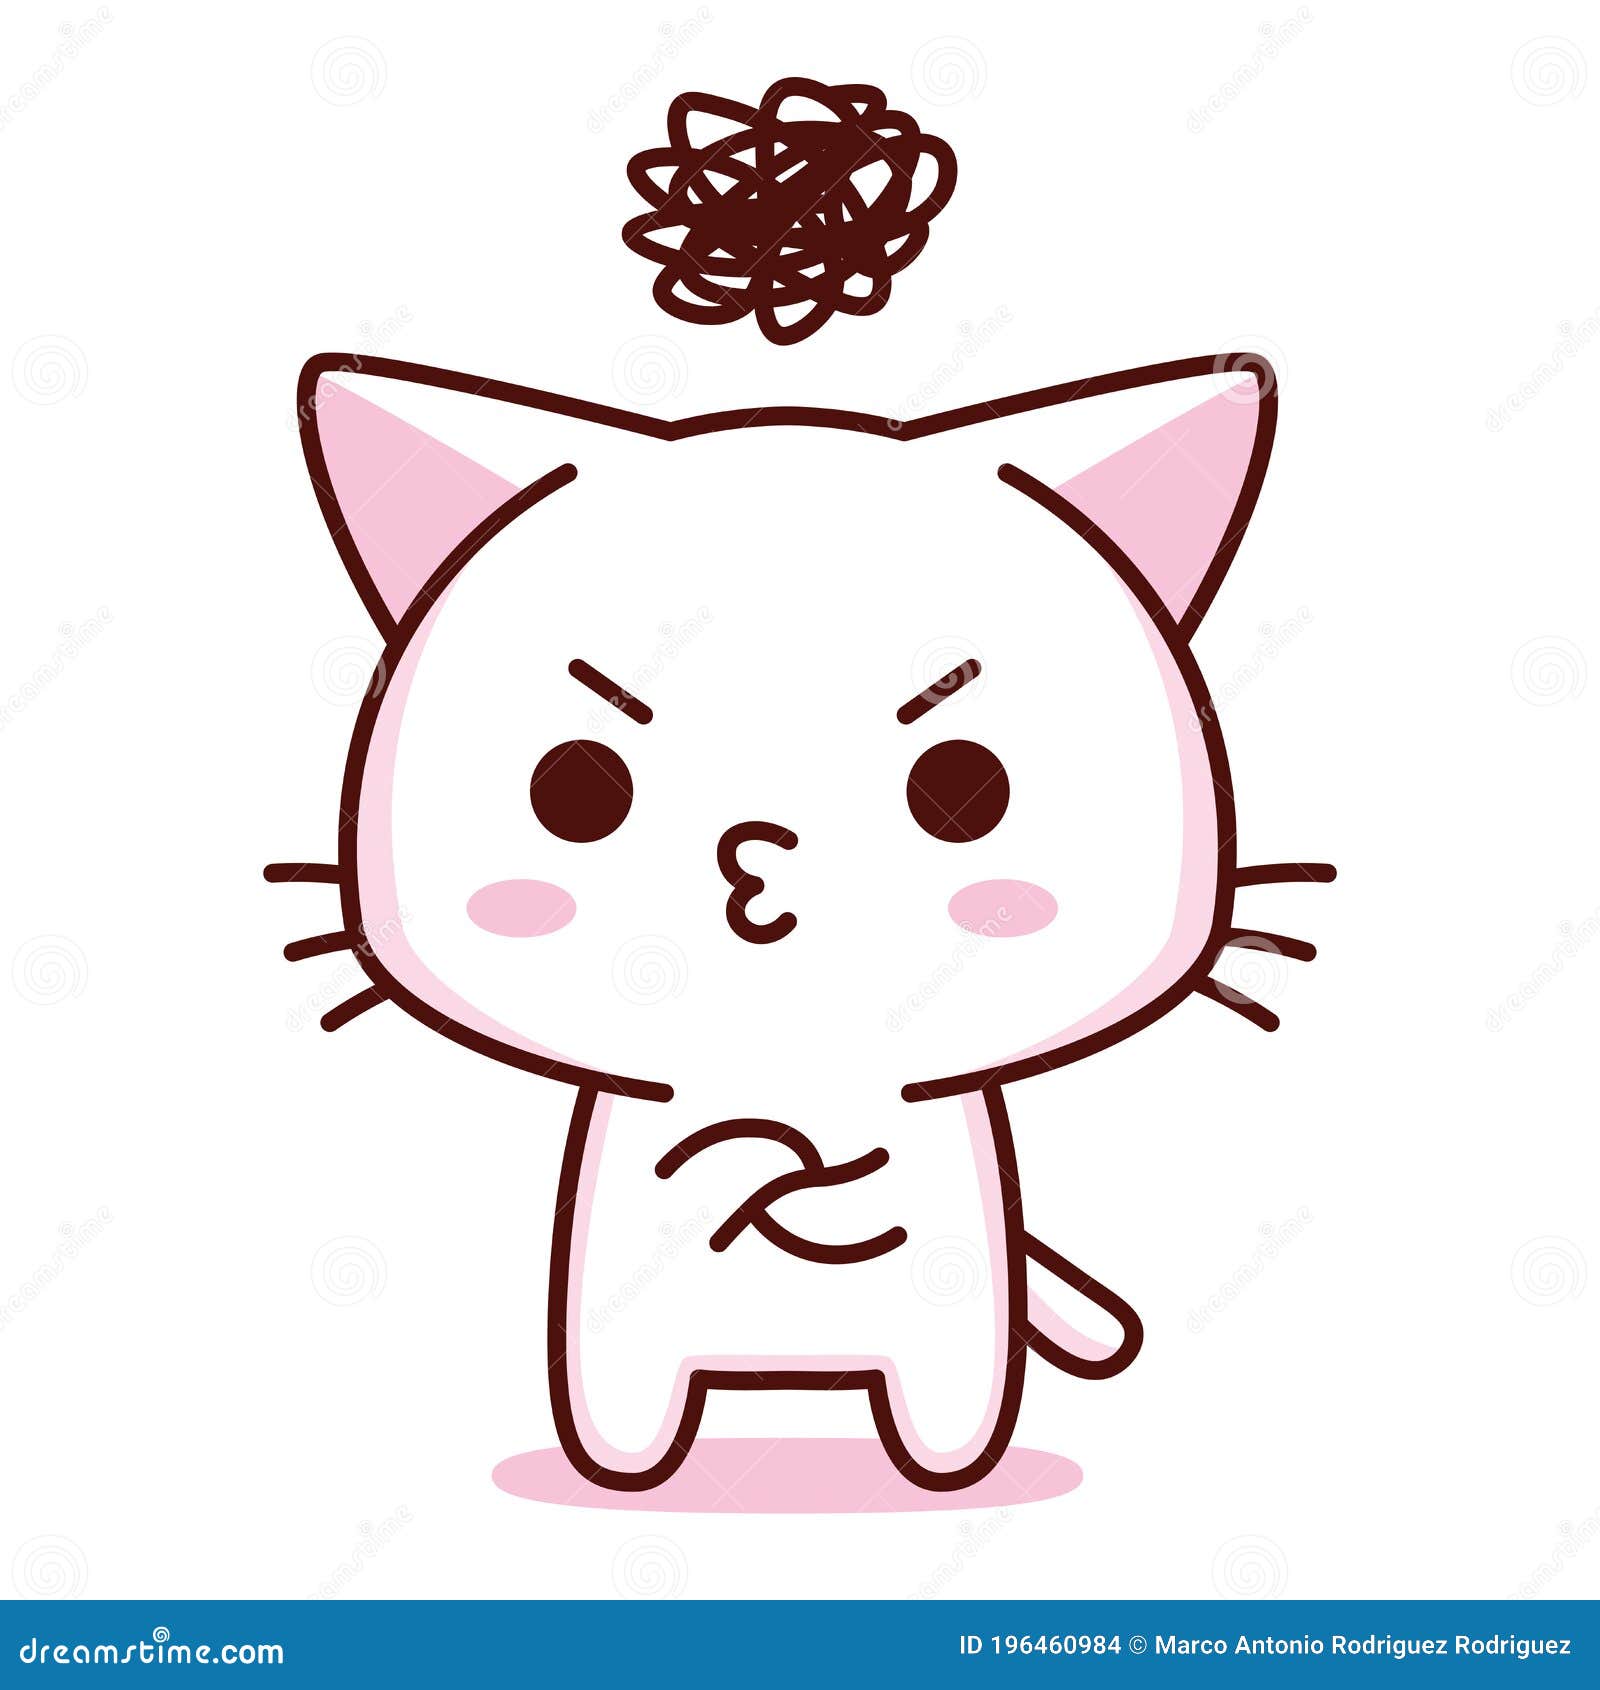 Isolated Cute Angry Cat Emoji Stock Vector - Illustration of angry, kitten:  225028193